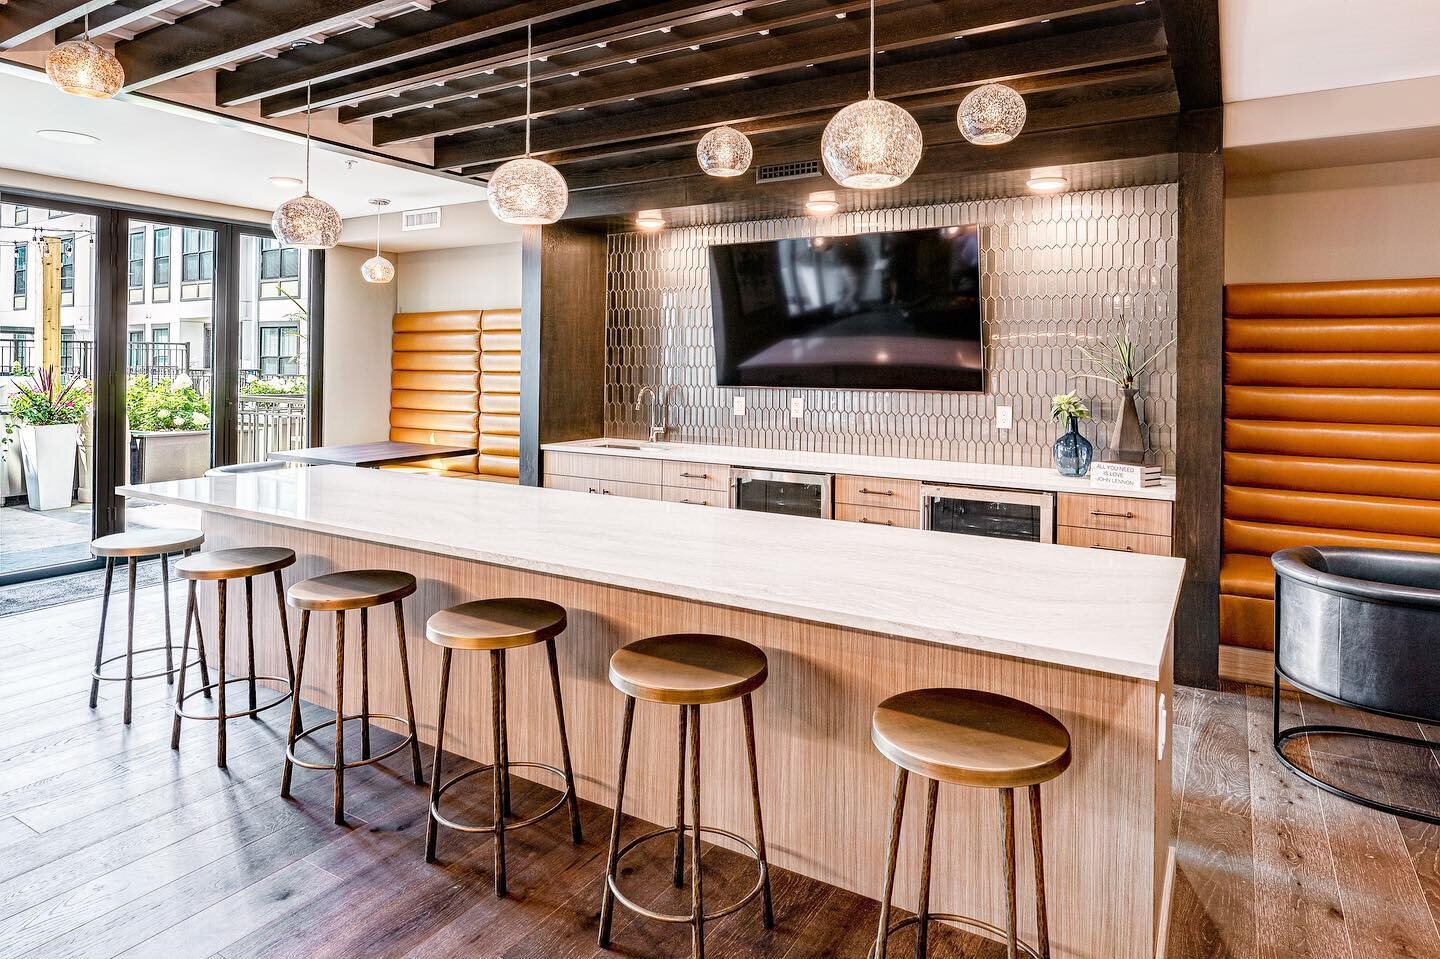 Who is going to be watching our dear #Buckeyes on Monday night? We love creating spaces where people can gather and make memories together.&nbsp;&nbsp;We hope 2021 gives us all more opportunities for that.&nbsp;&nbsp;@borrorurbanliving @xanderonstate